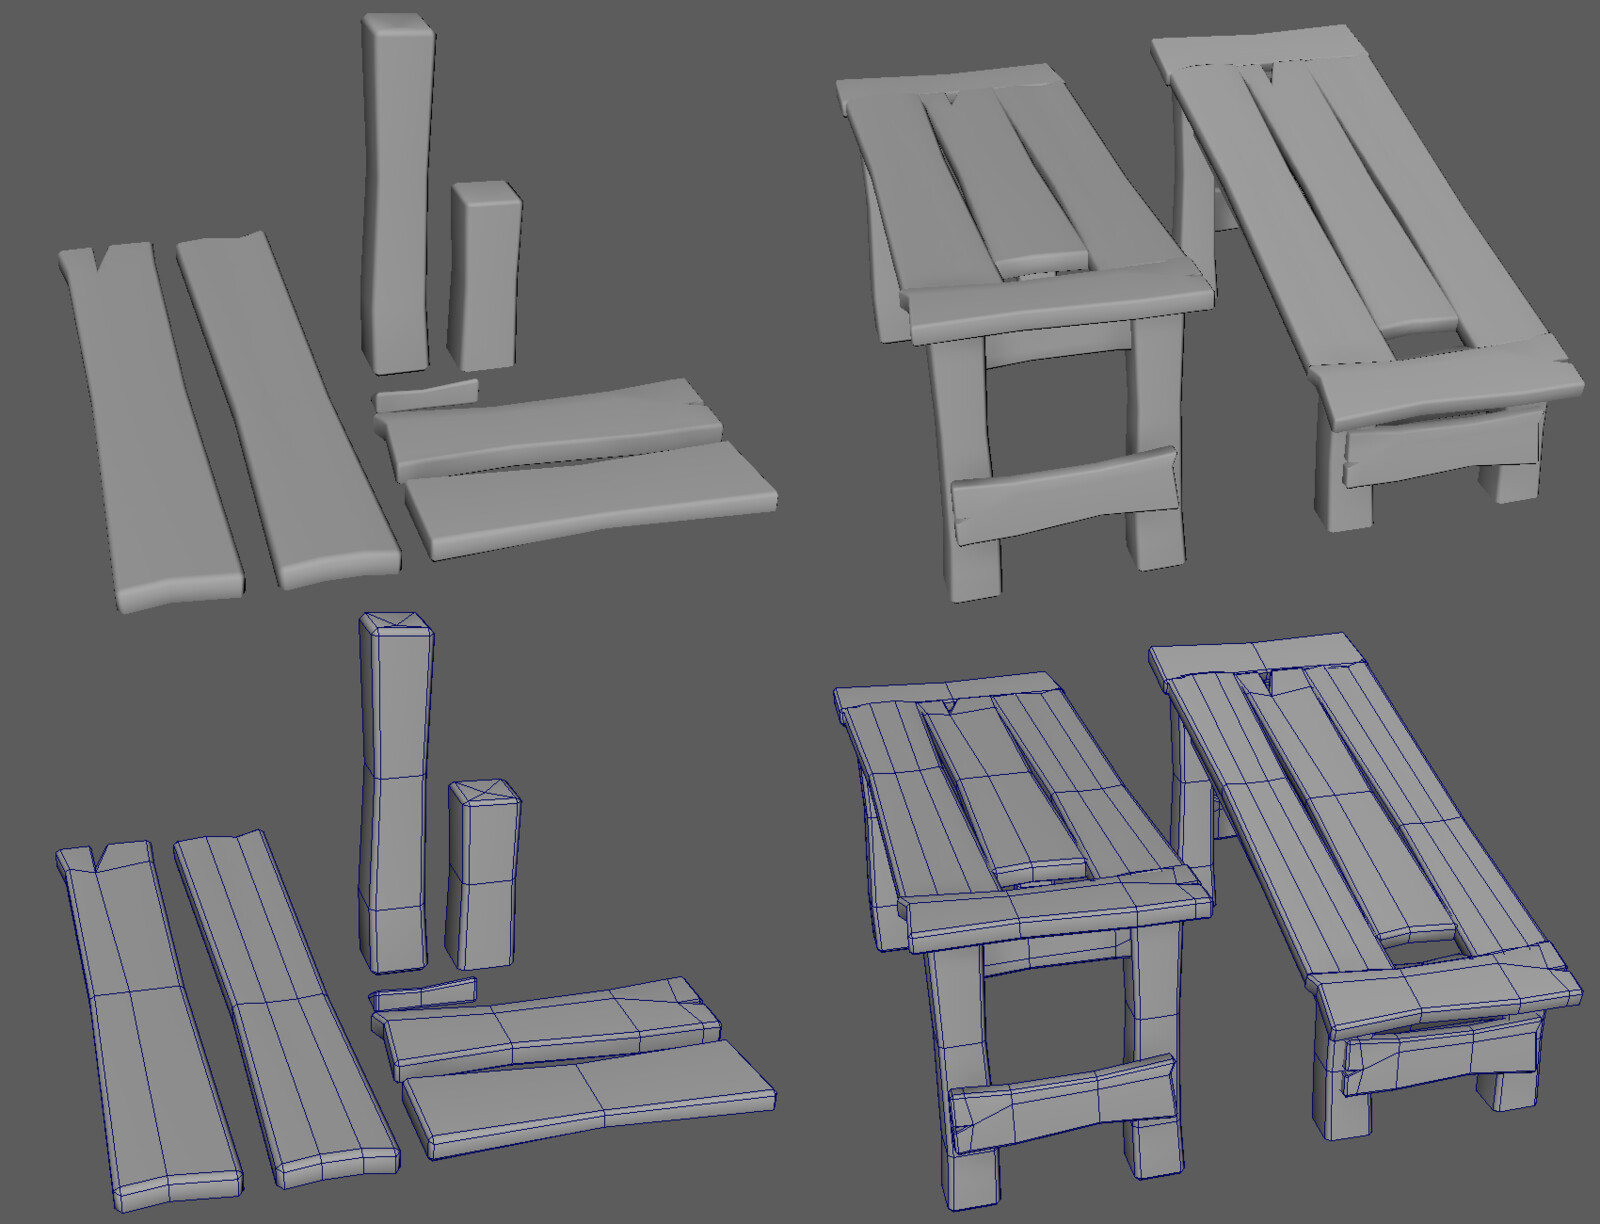 Low poly modular meshes, in Maya. Each table is built using seven modular planks.